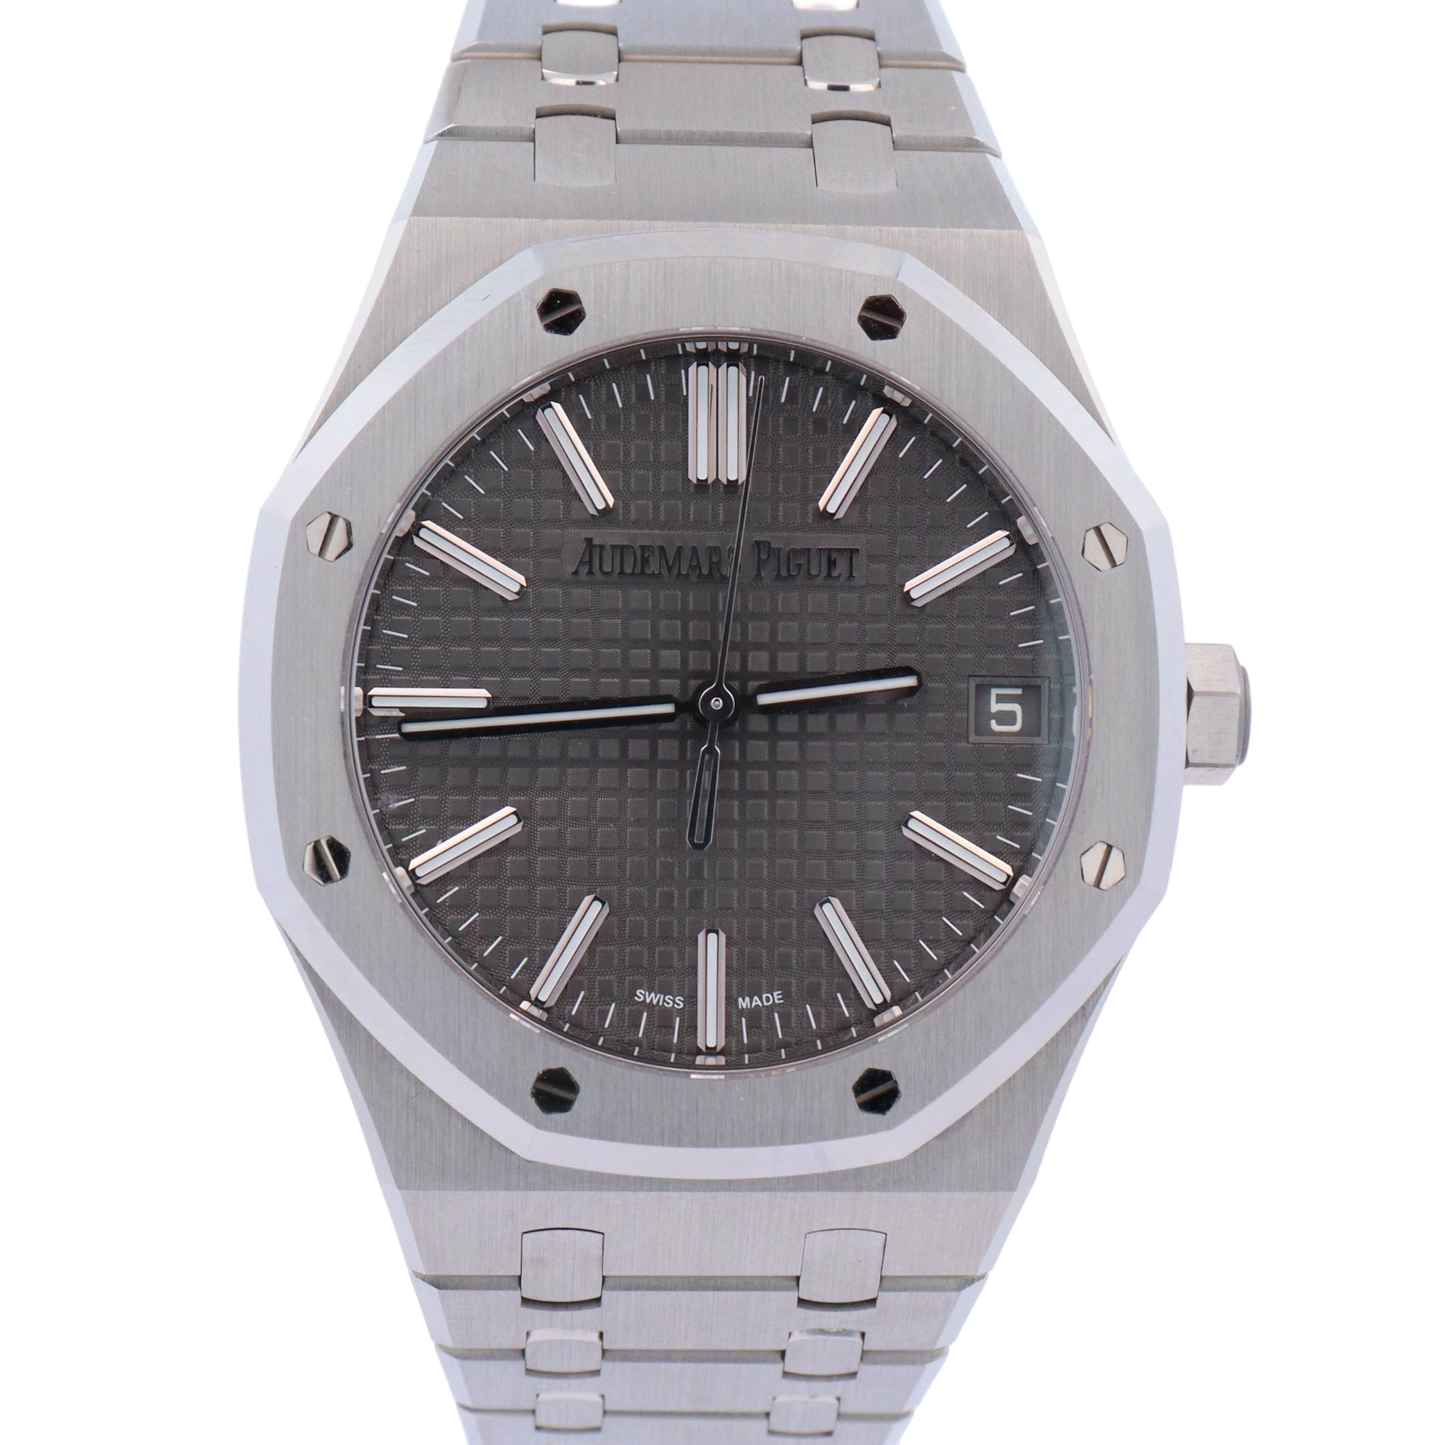 Audemars Piguet Royal Oak "50th Anniversary" 41mm Stainless Steel Black Stick Dial Watch Reference# 15510ST.OO.1320ST.05 - Happy Jewelers Fine Jewelry Lifetime Warranty